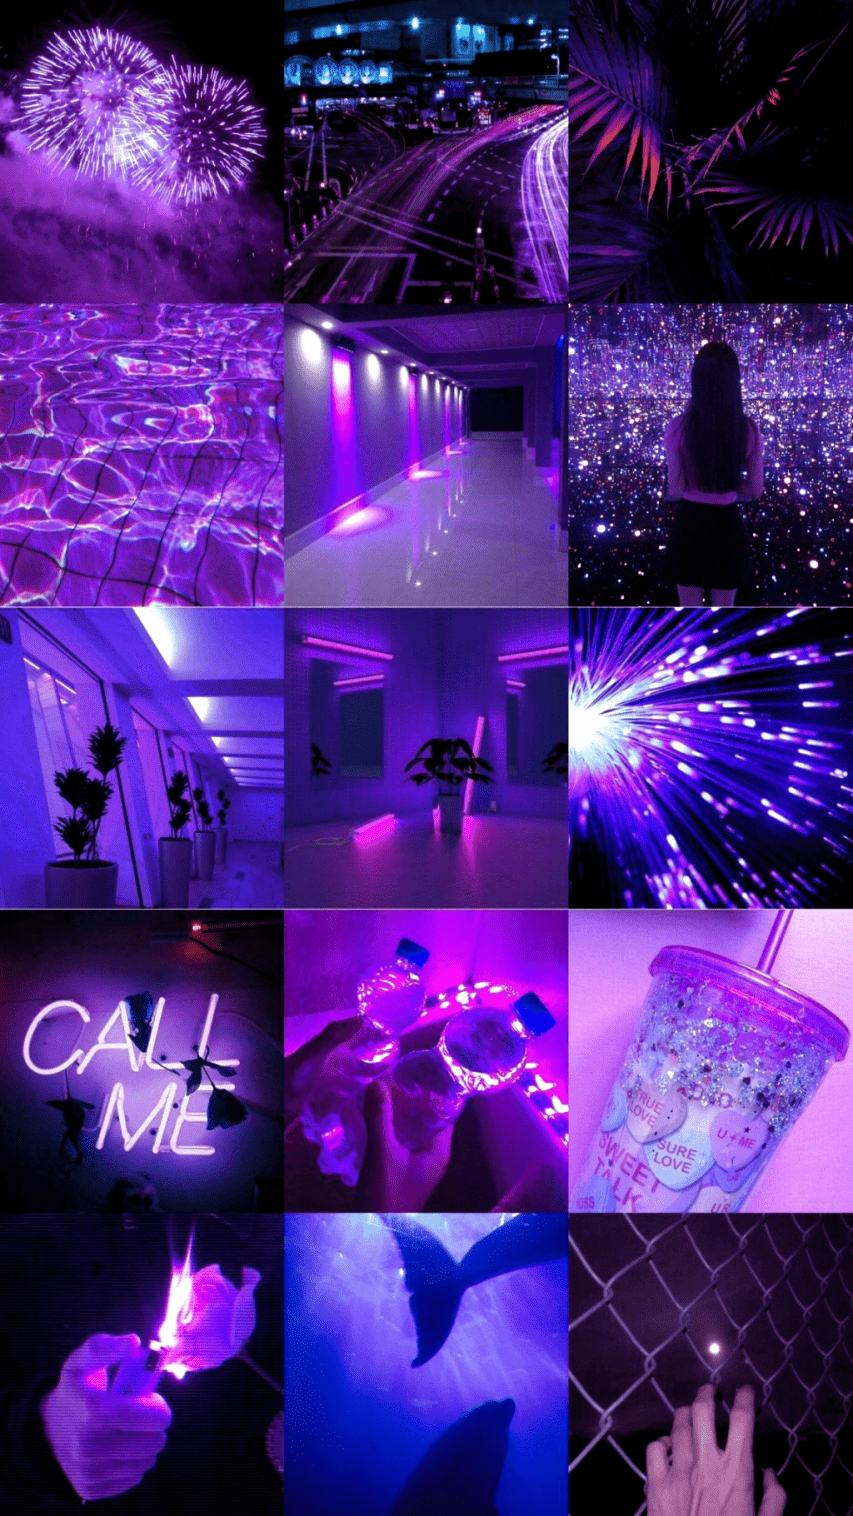 A collage of purple pictures with fireworks in the background - Capricorn